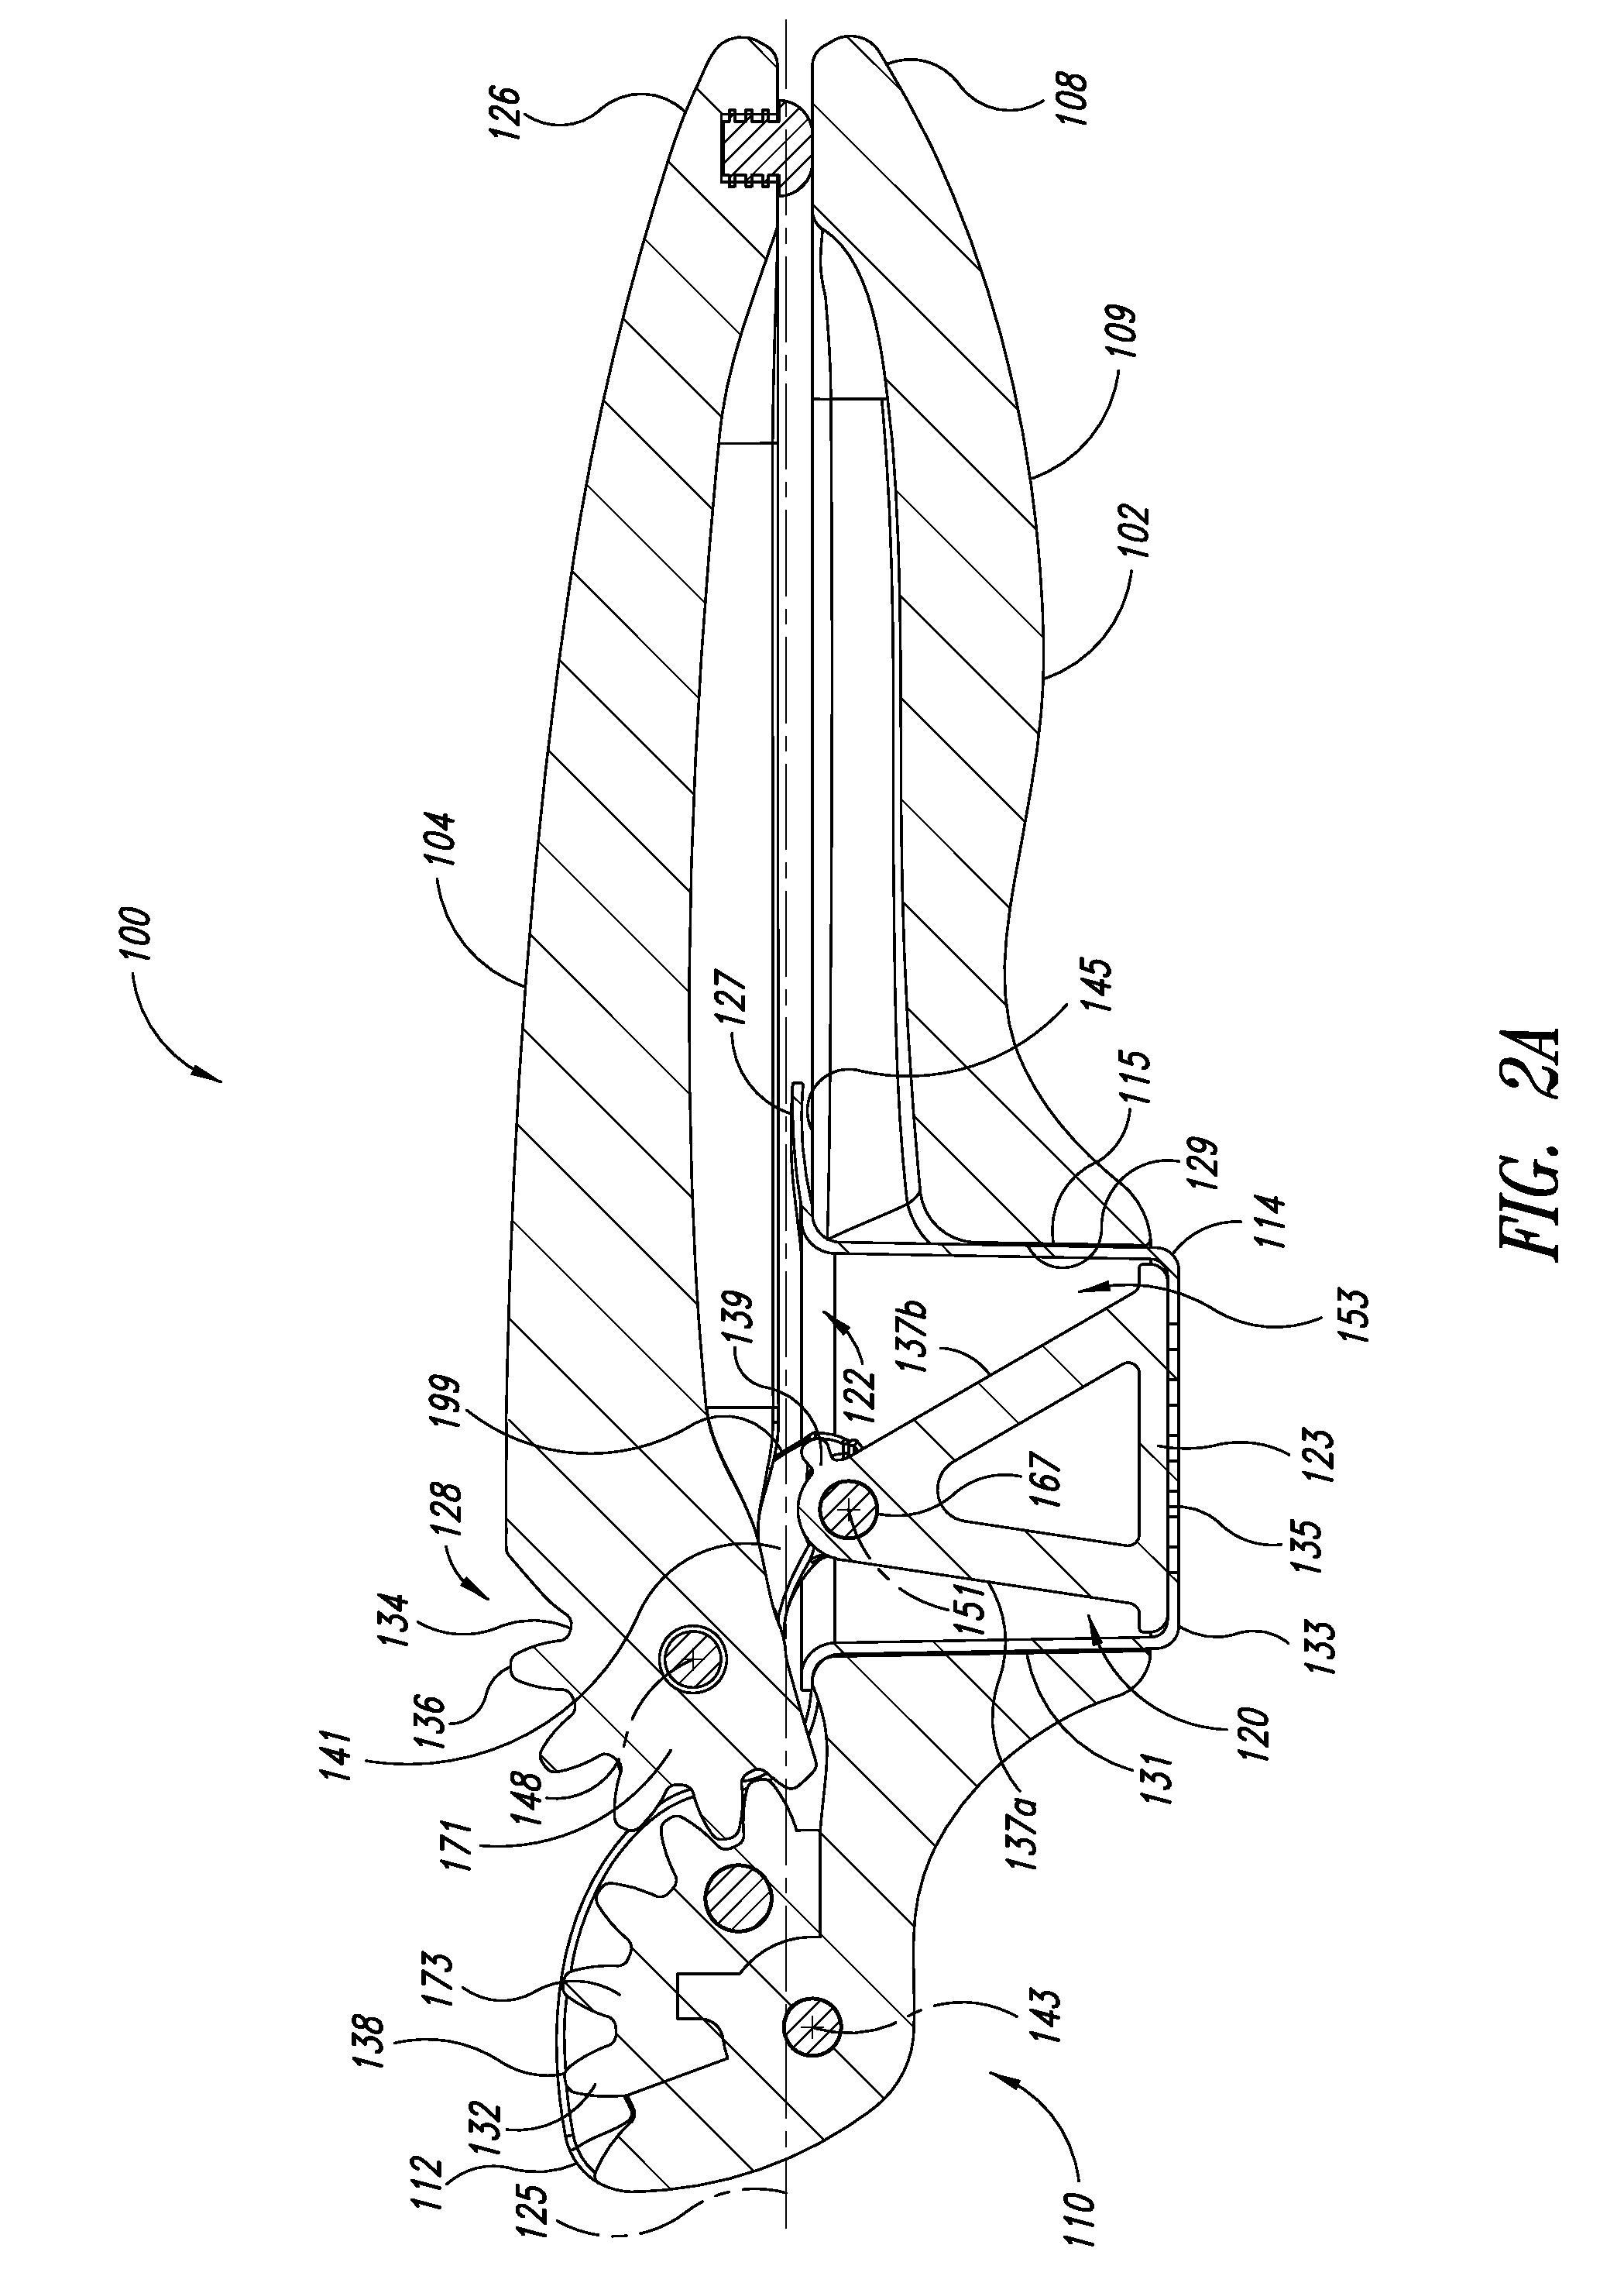 Devices and systems for compressing food articles